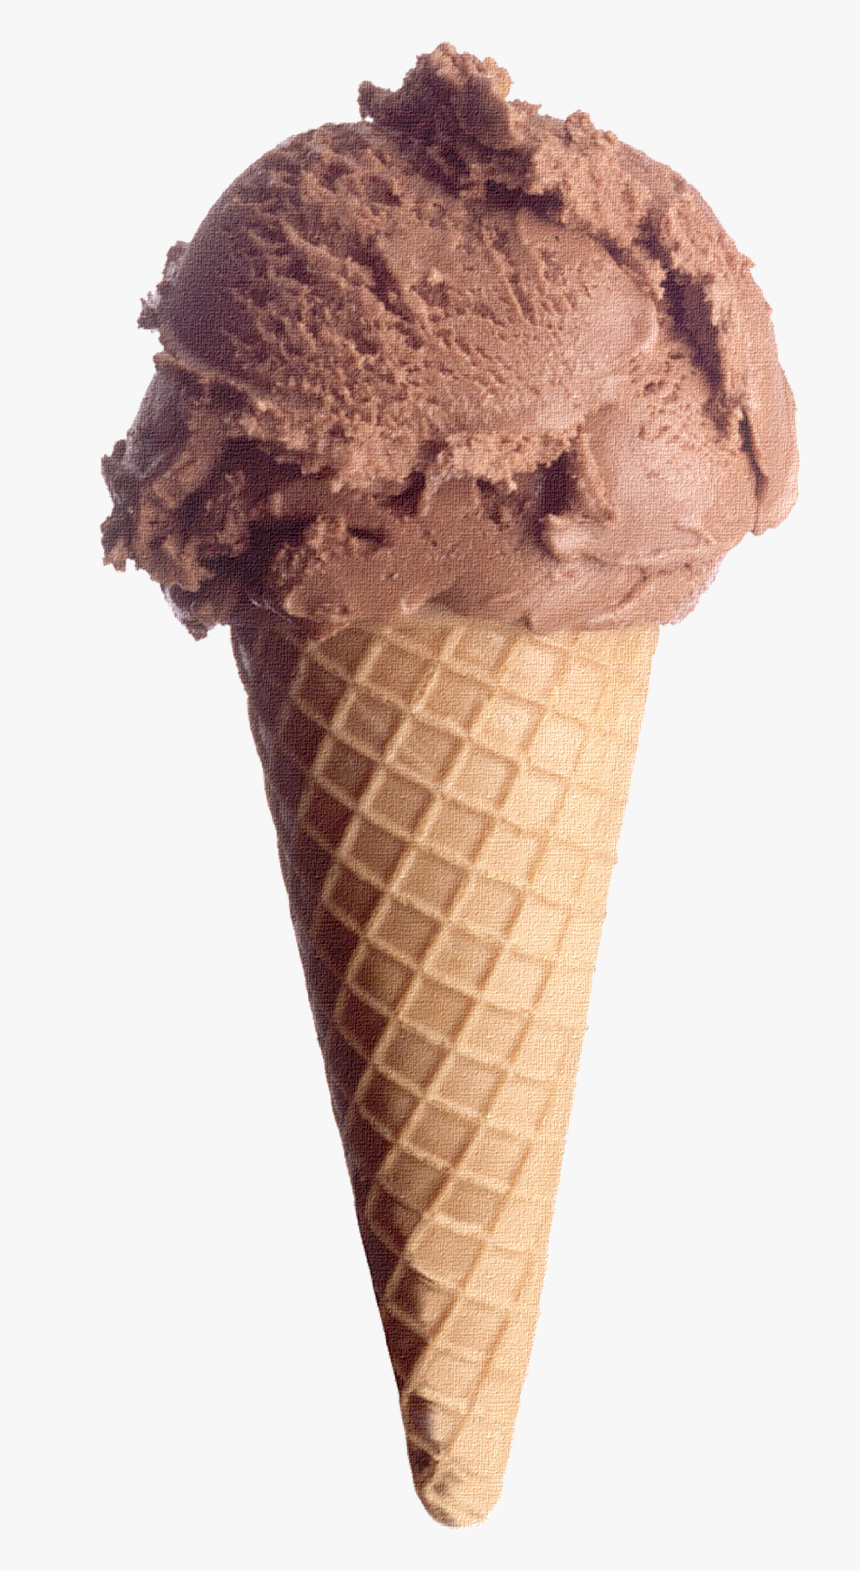 Ice Cream Png Chocolate - Ice Cream Chocolate Cone, Transparent Png, Free Download